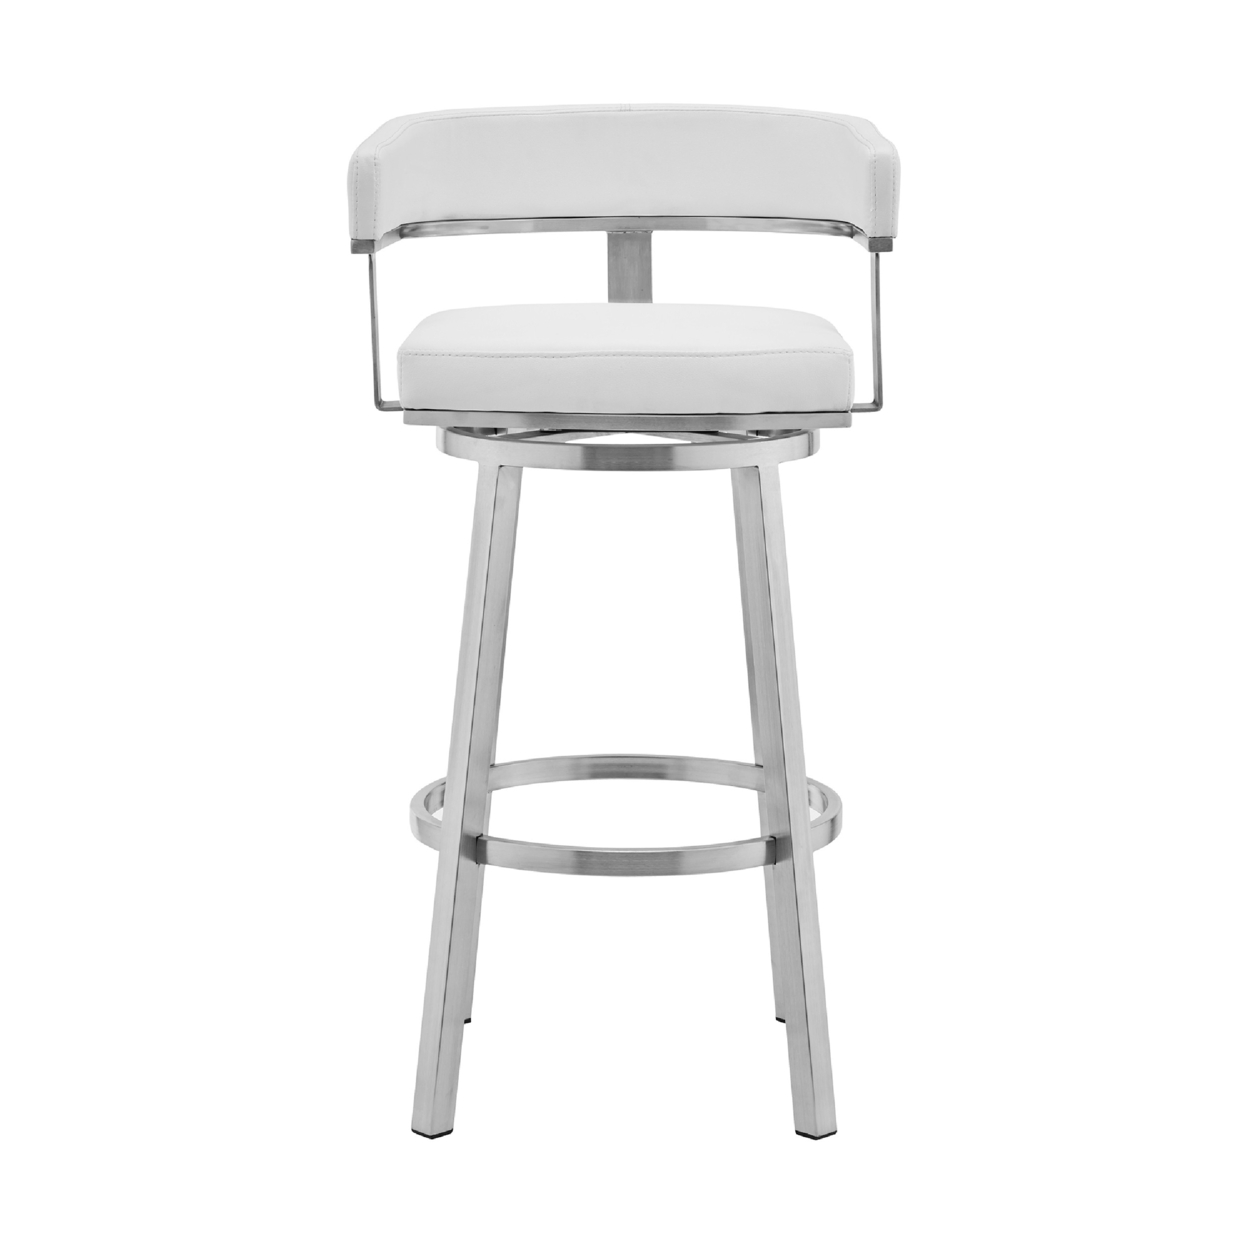 Swivel Barstool With Curved Open Back And Metal Legs, White And Silver- Saltoro Sherpi